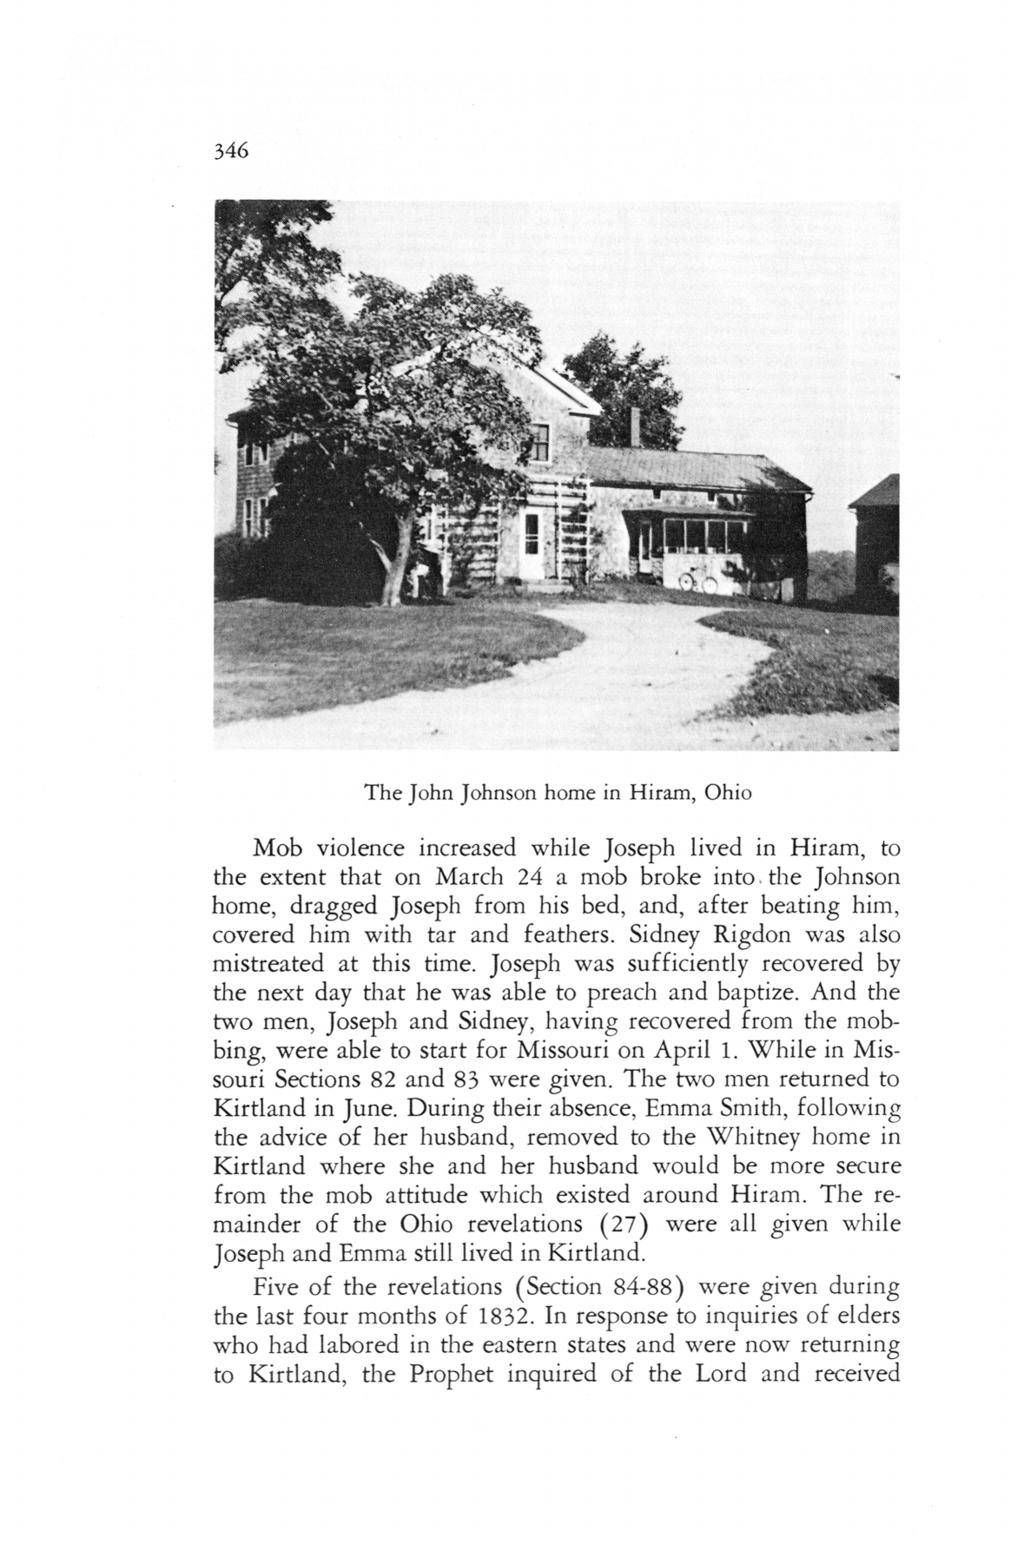 346 the john johnson home n hram oho mob volence ncreased whle joseph lved n hram to the extent that on march 24 a mob broke nto the johnson home dragged joseph from hs bed and after beatng hm